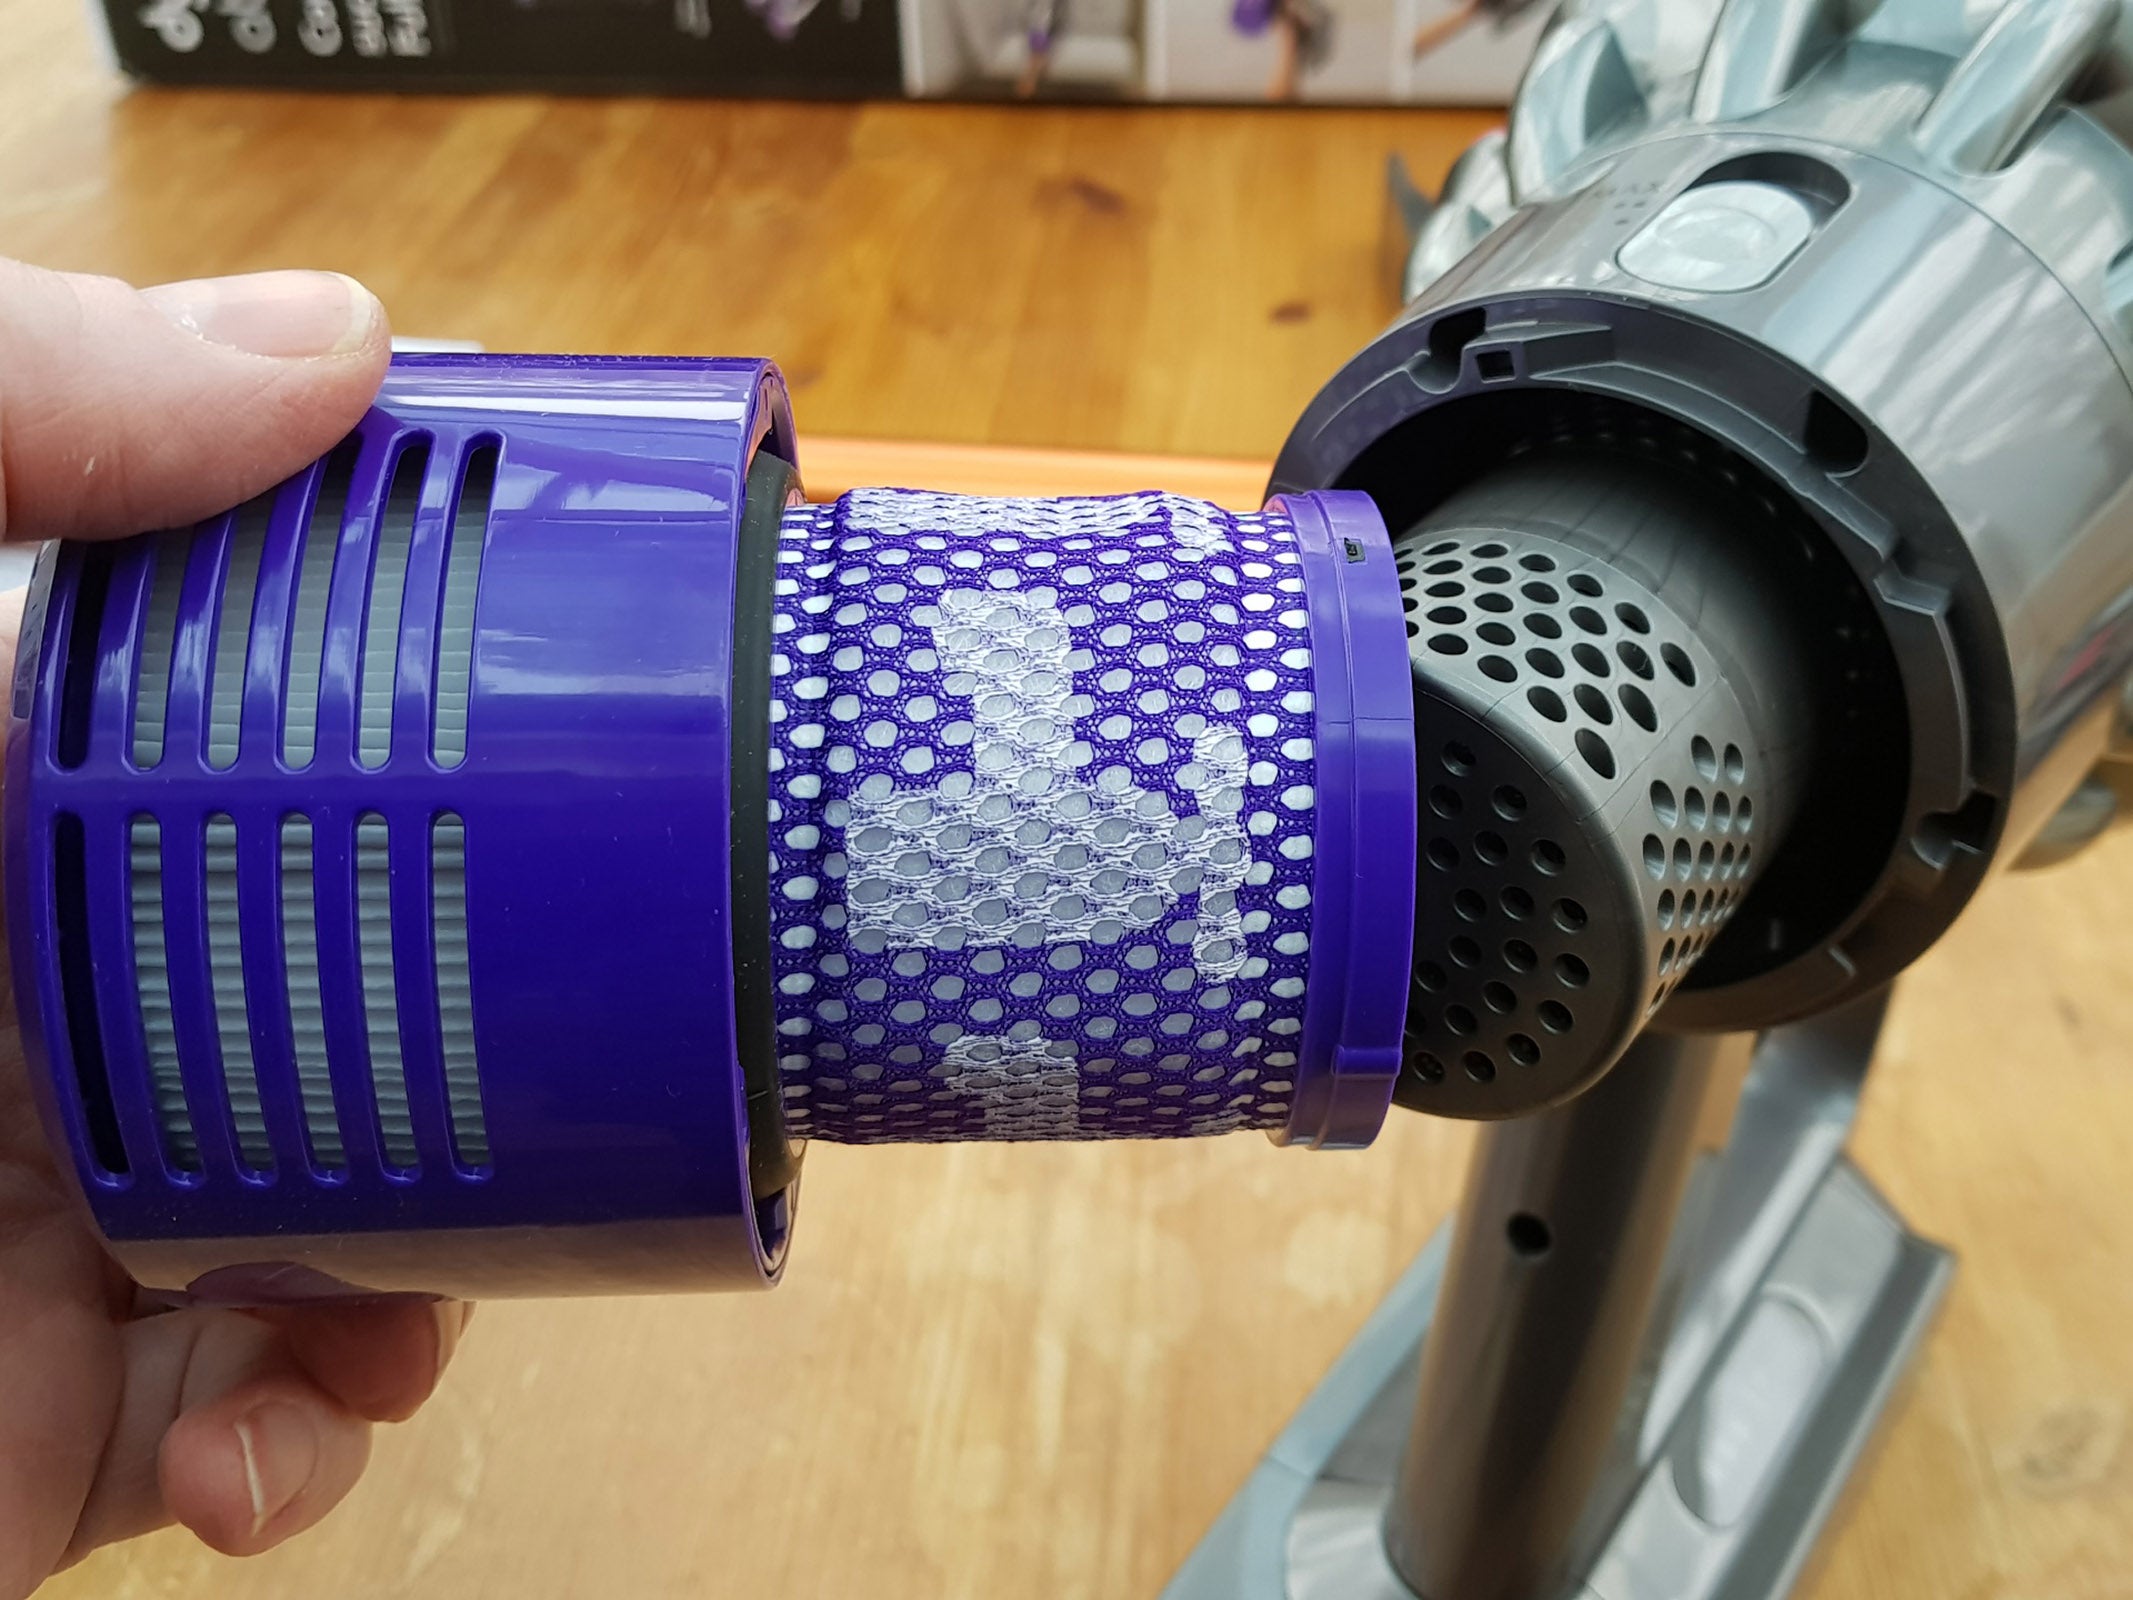 Hand holding Dyson Cyclone V10 vacuum filter and bin.